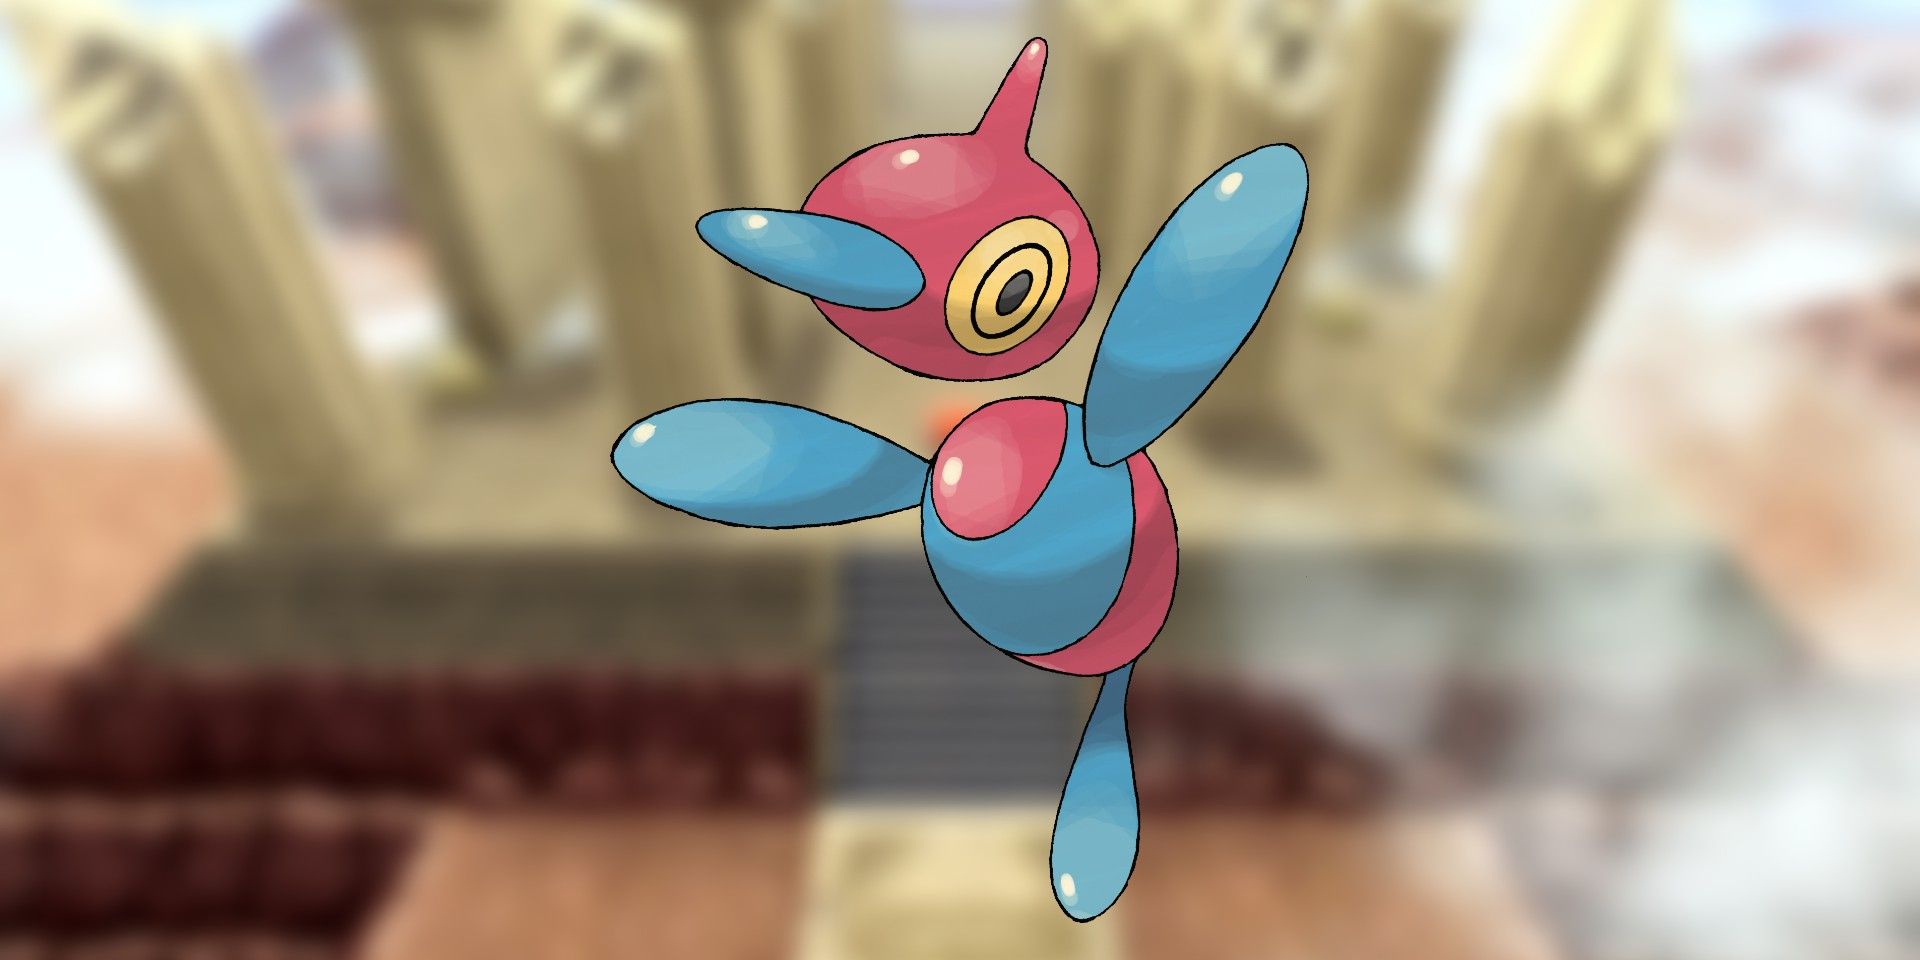 The Best Competitive NormalType Pokémon In Diamond & Pearl